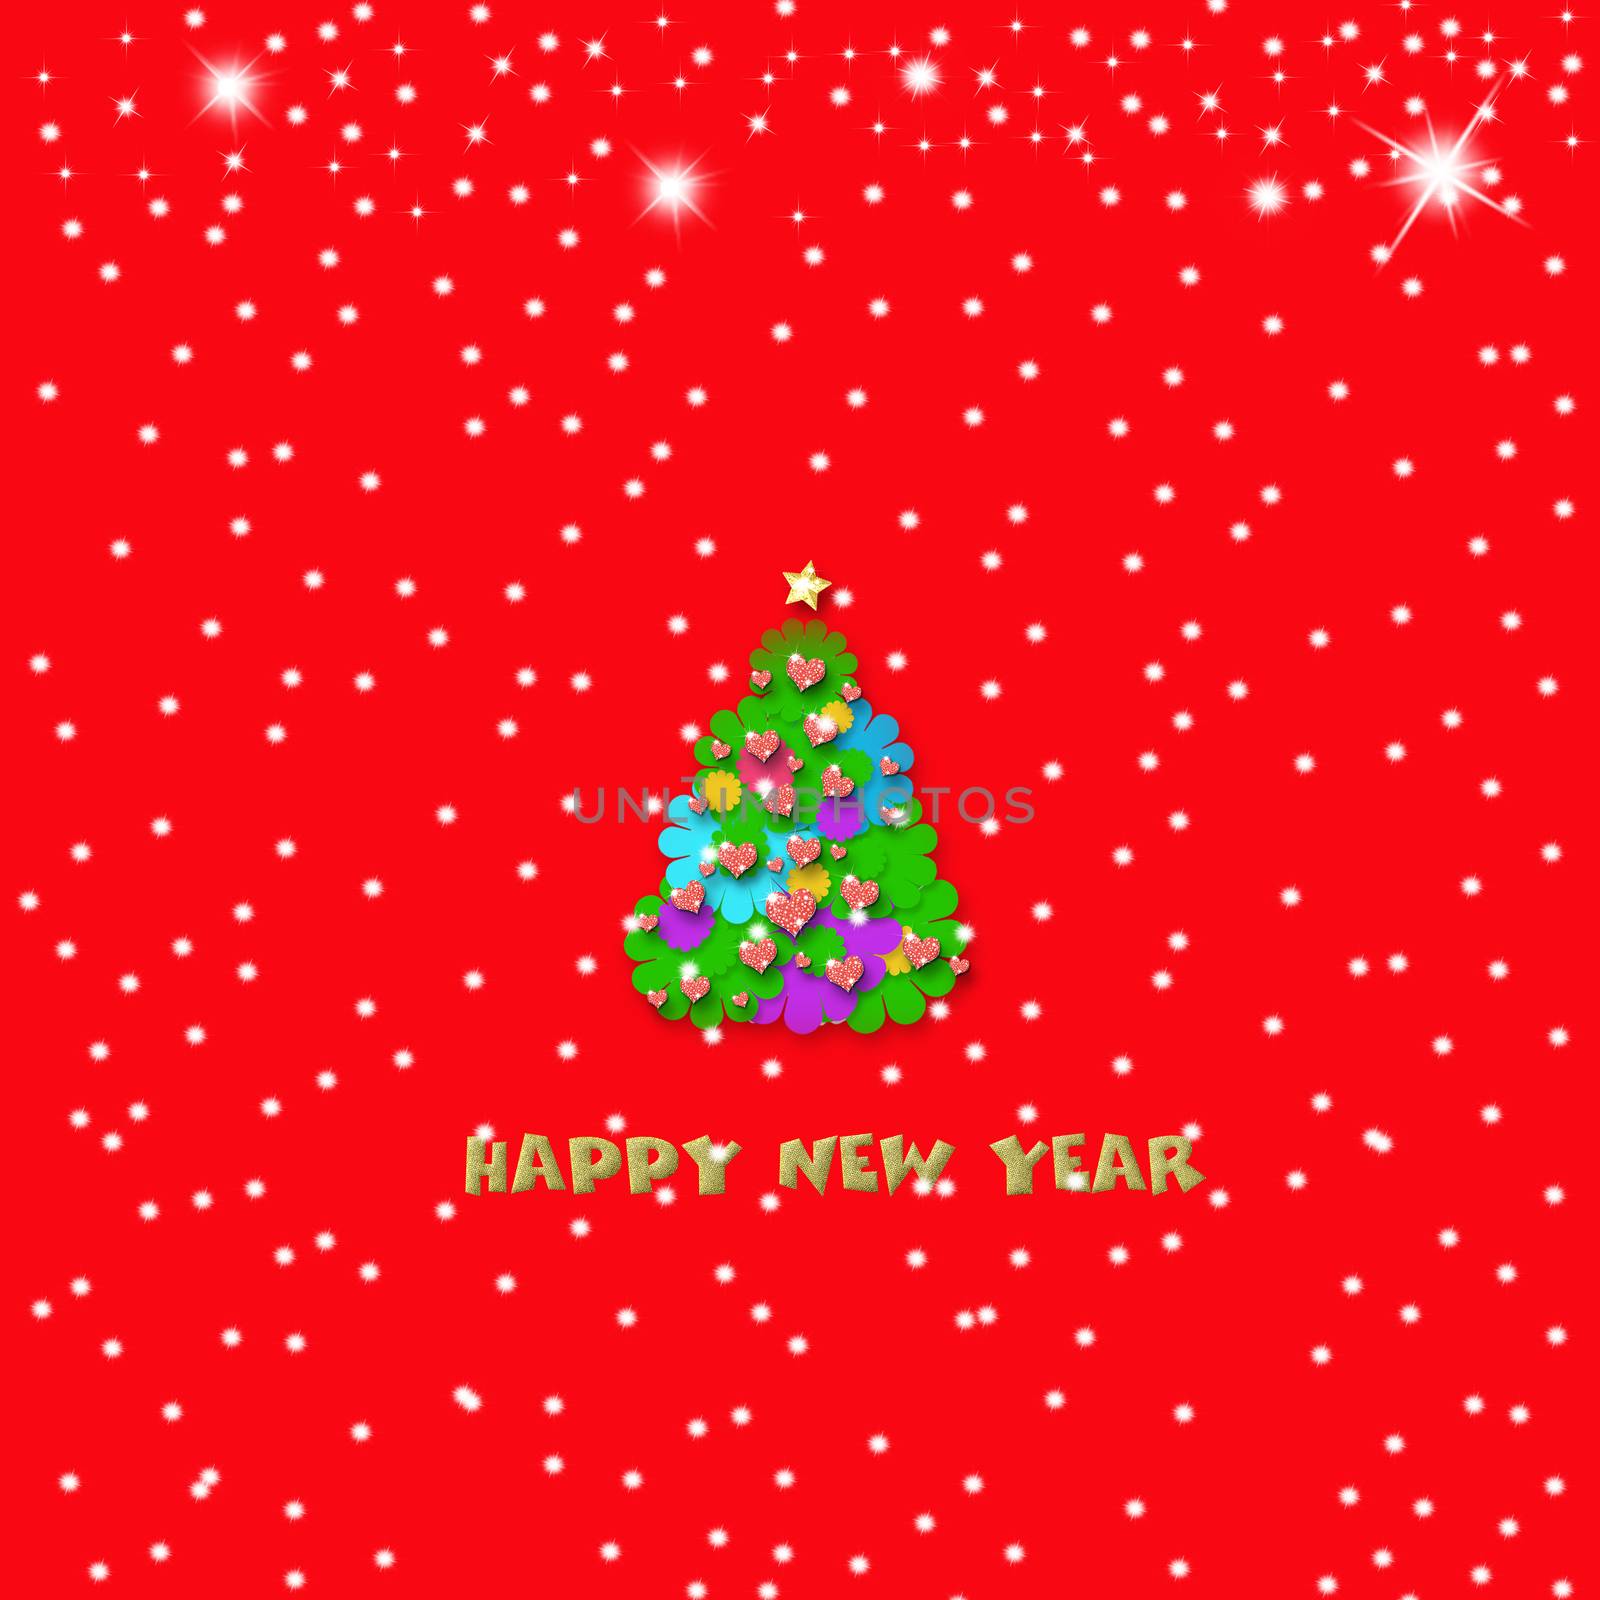 Happy New Year, Christmas tree red background